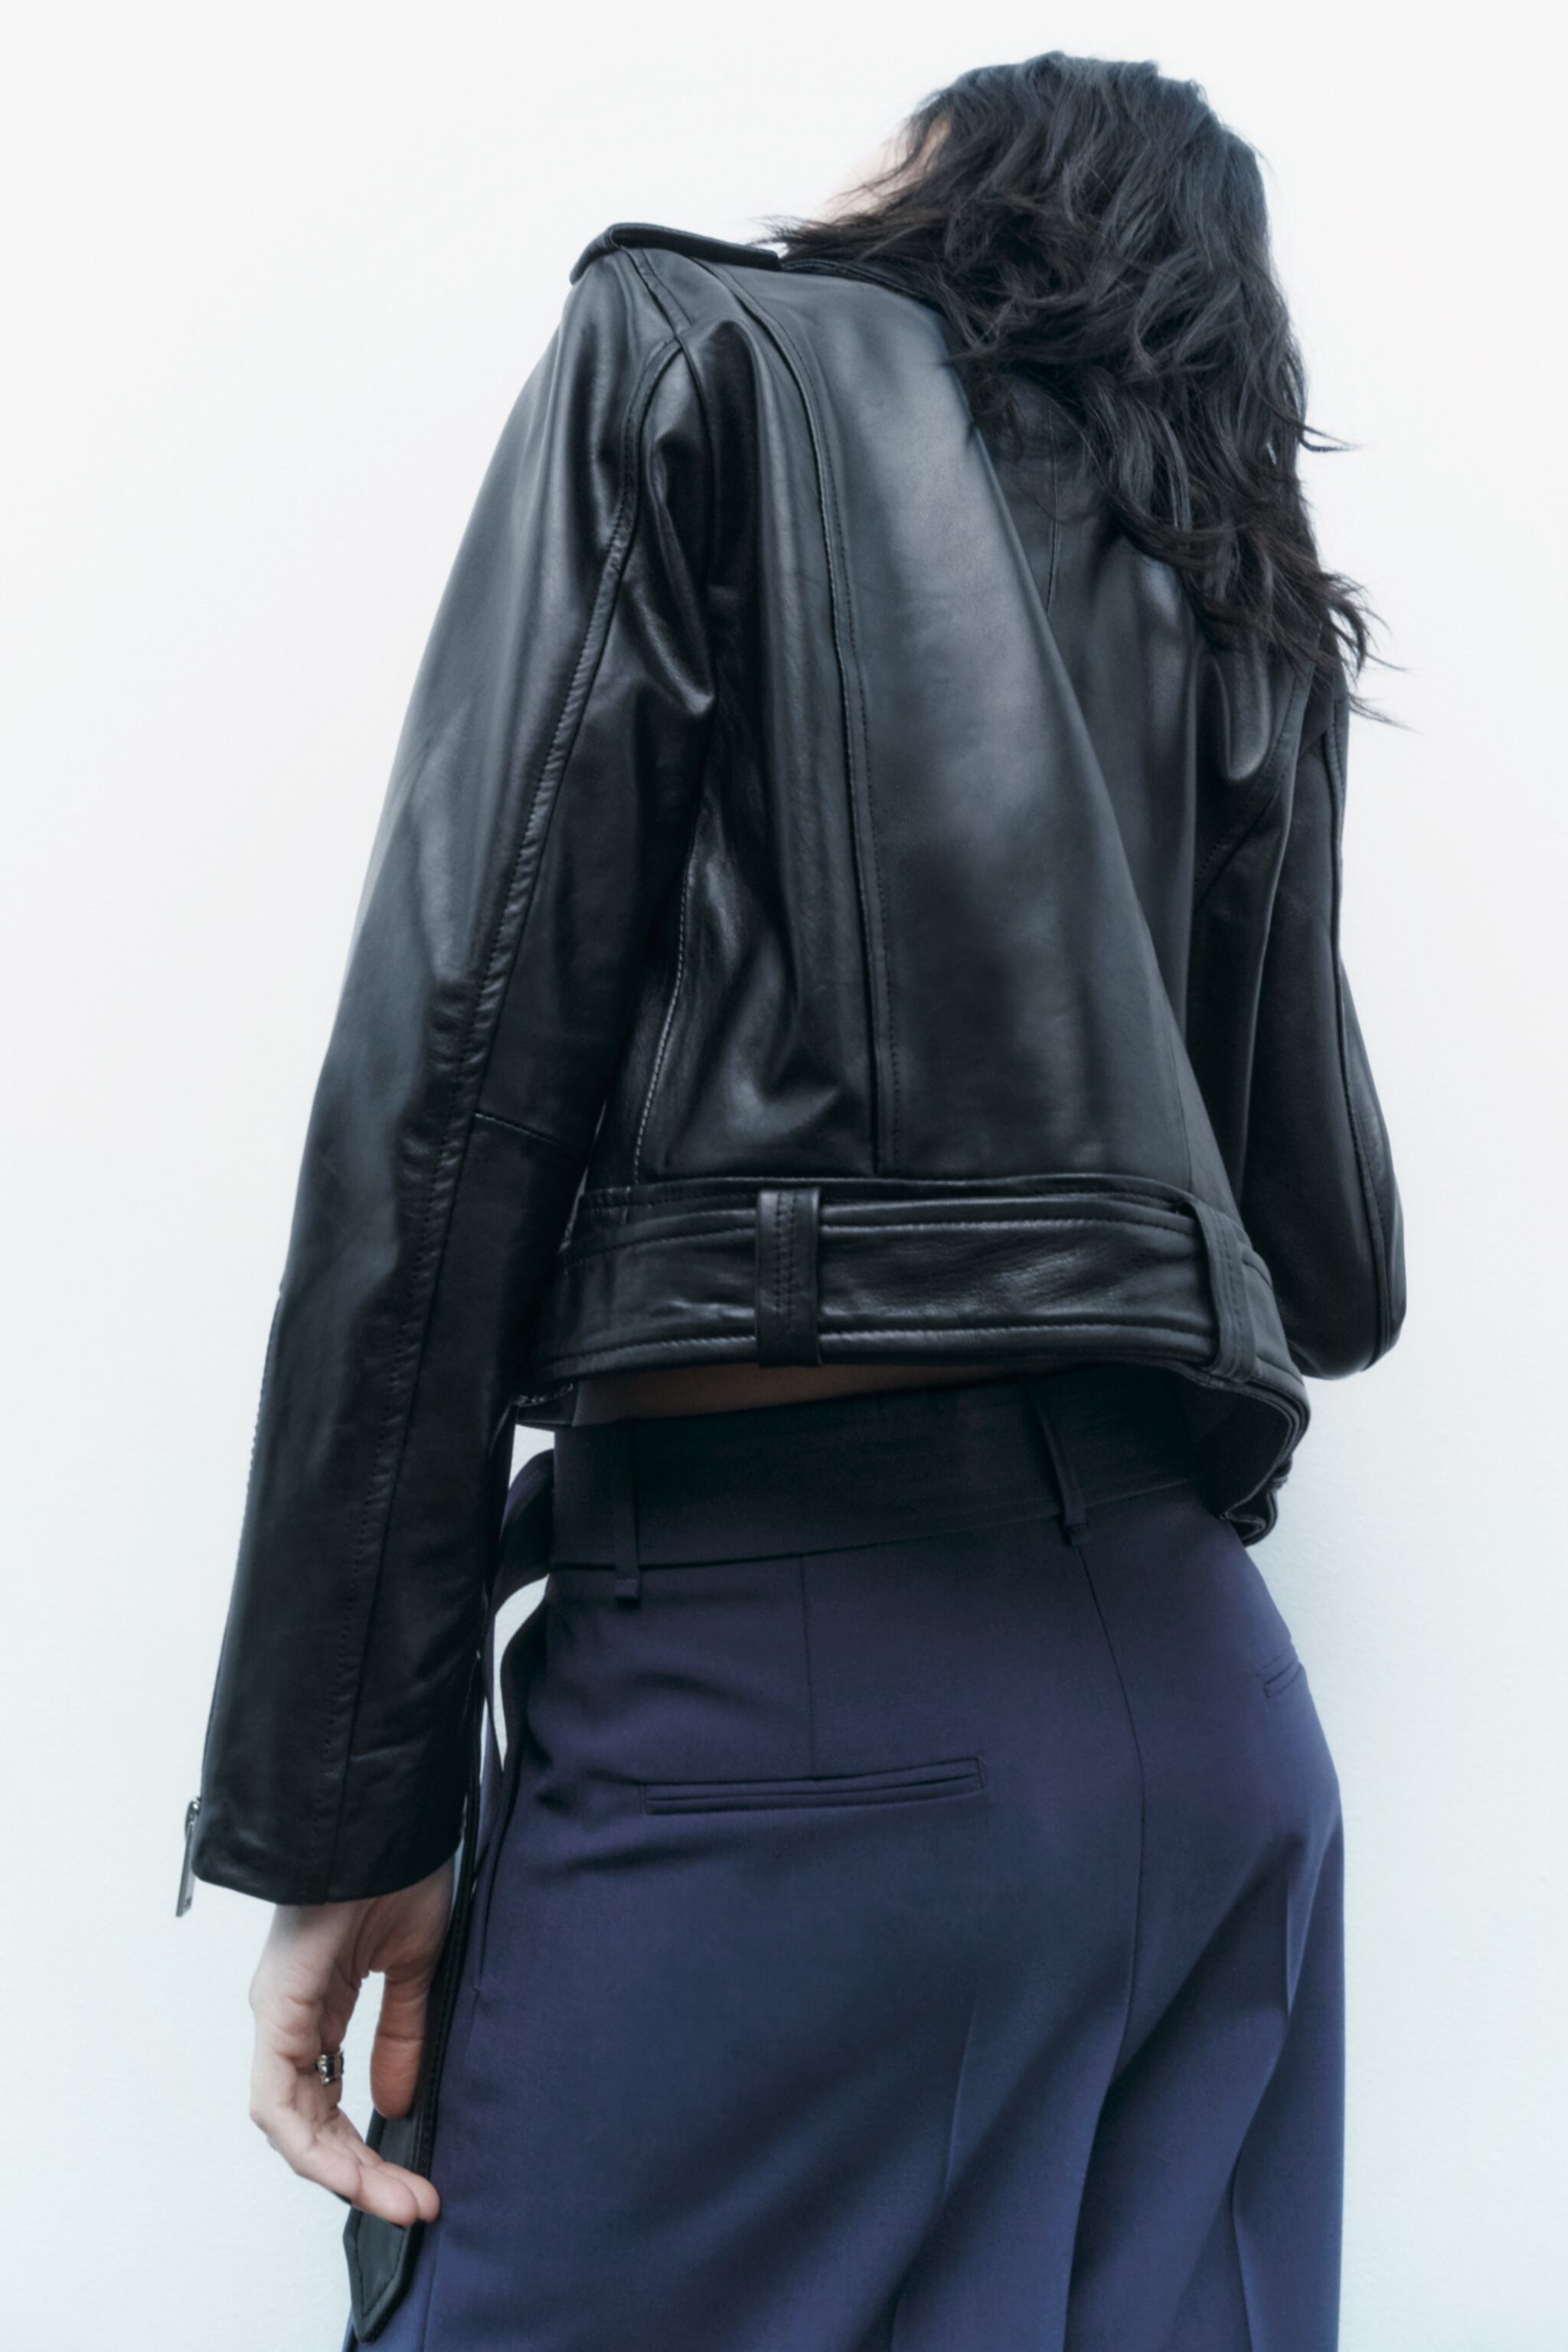 LEATHER JACKET WITH ZIPPERS